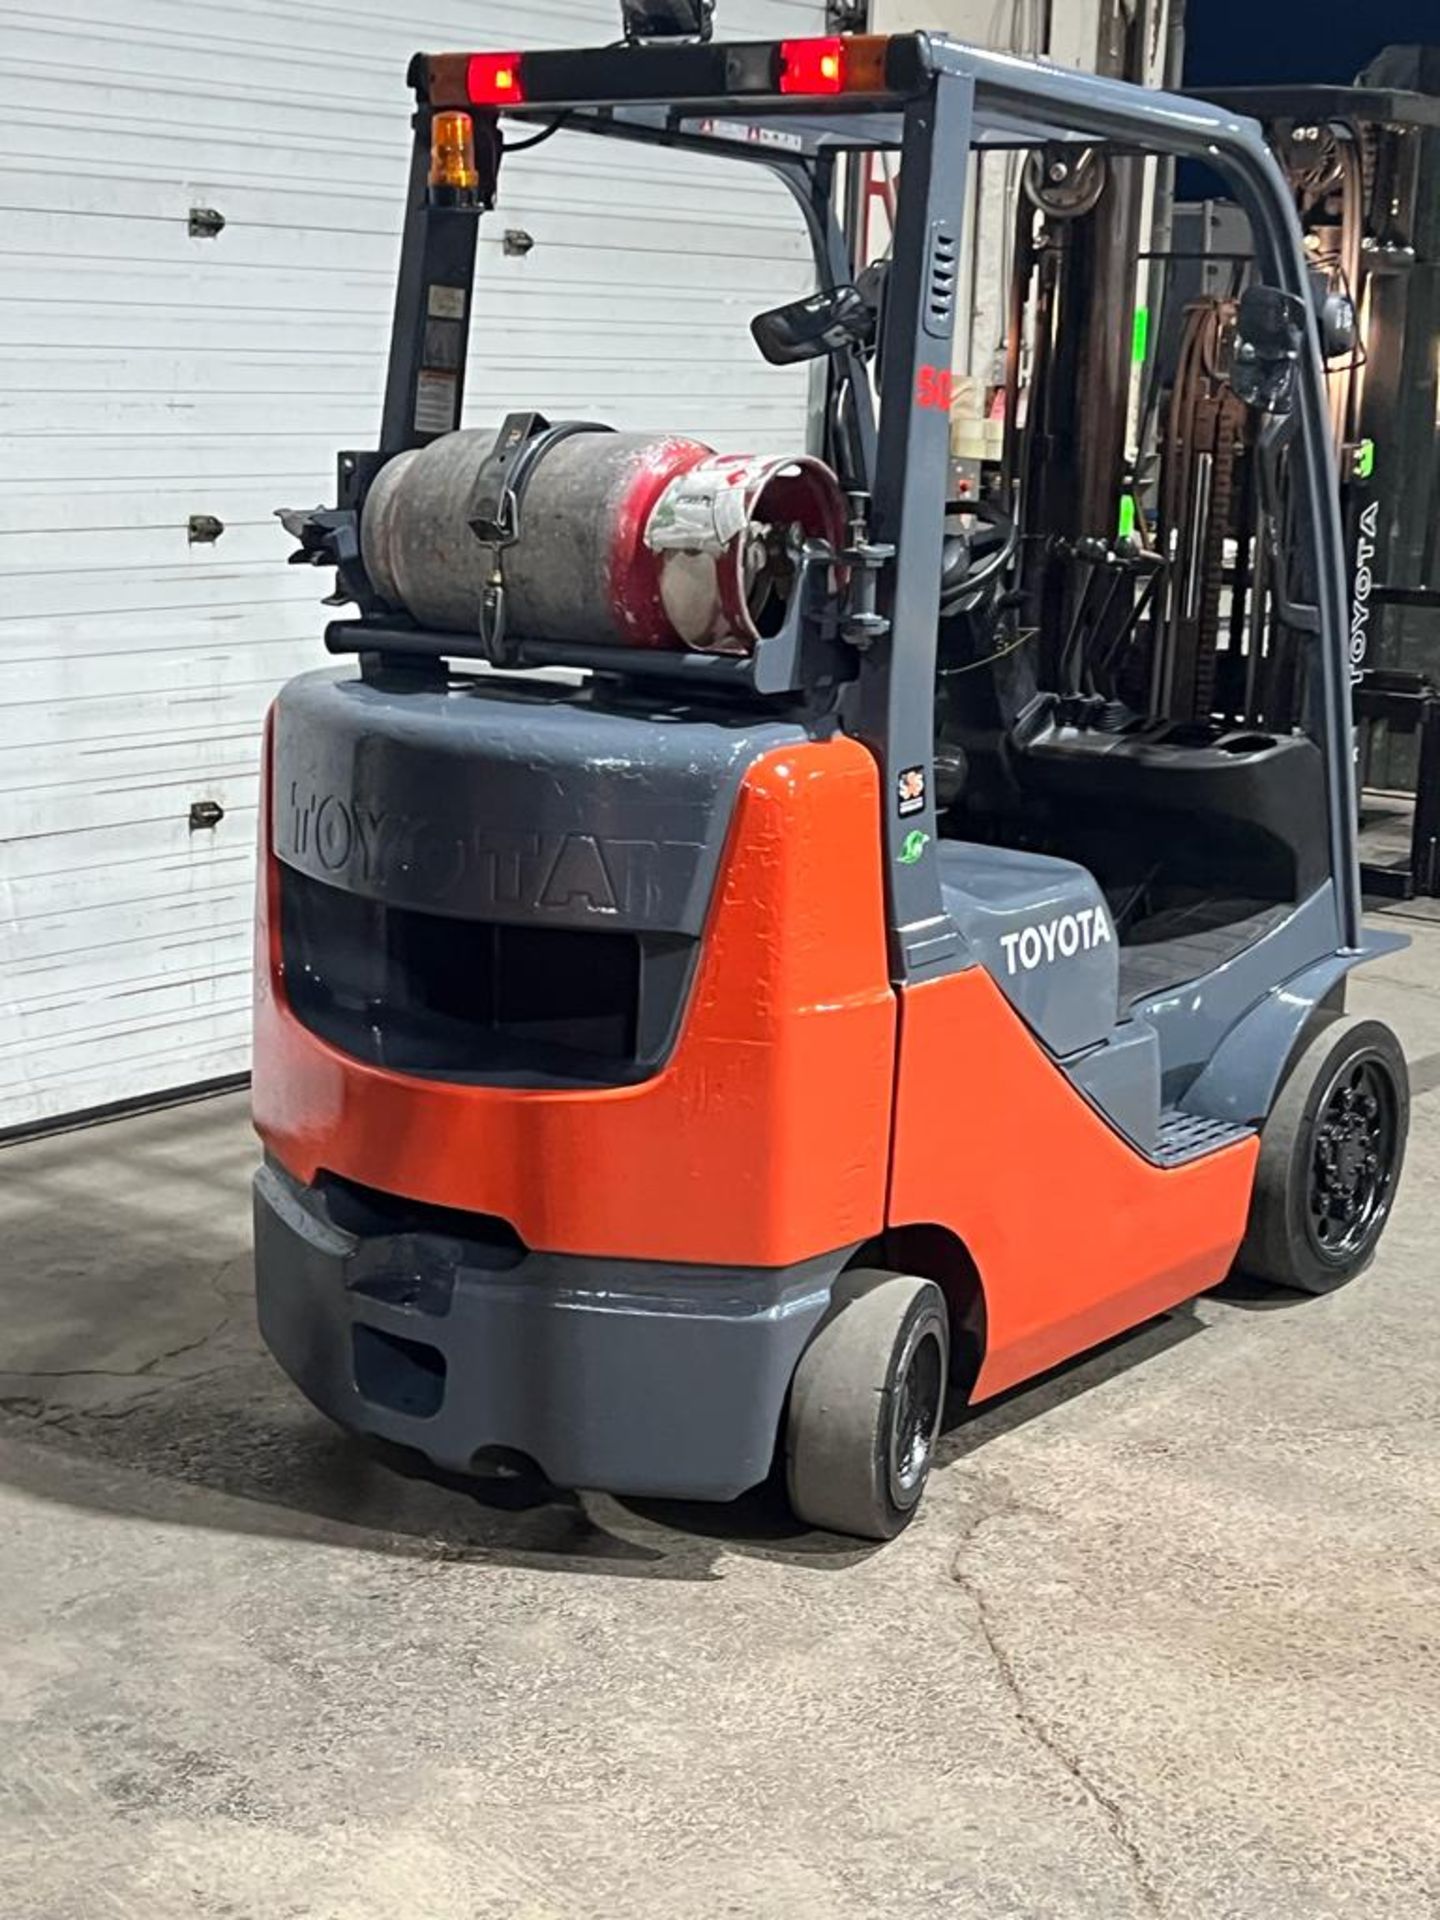 2014 Toyota 5,000lbs Capacity Forklift LPG (propane) with sideshift and 3-STAGE MAST (no propane - Image 3 of 3